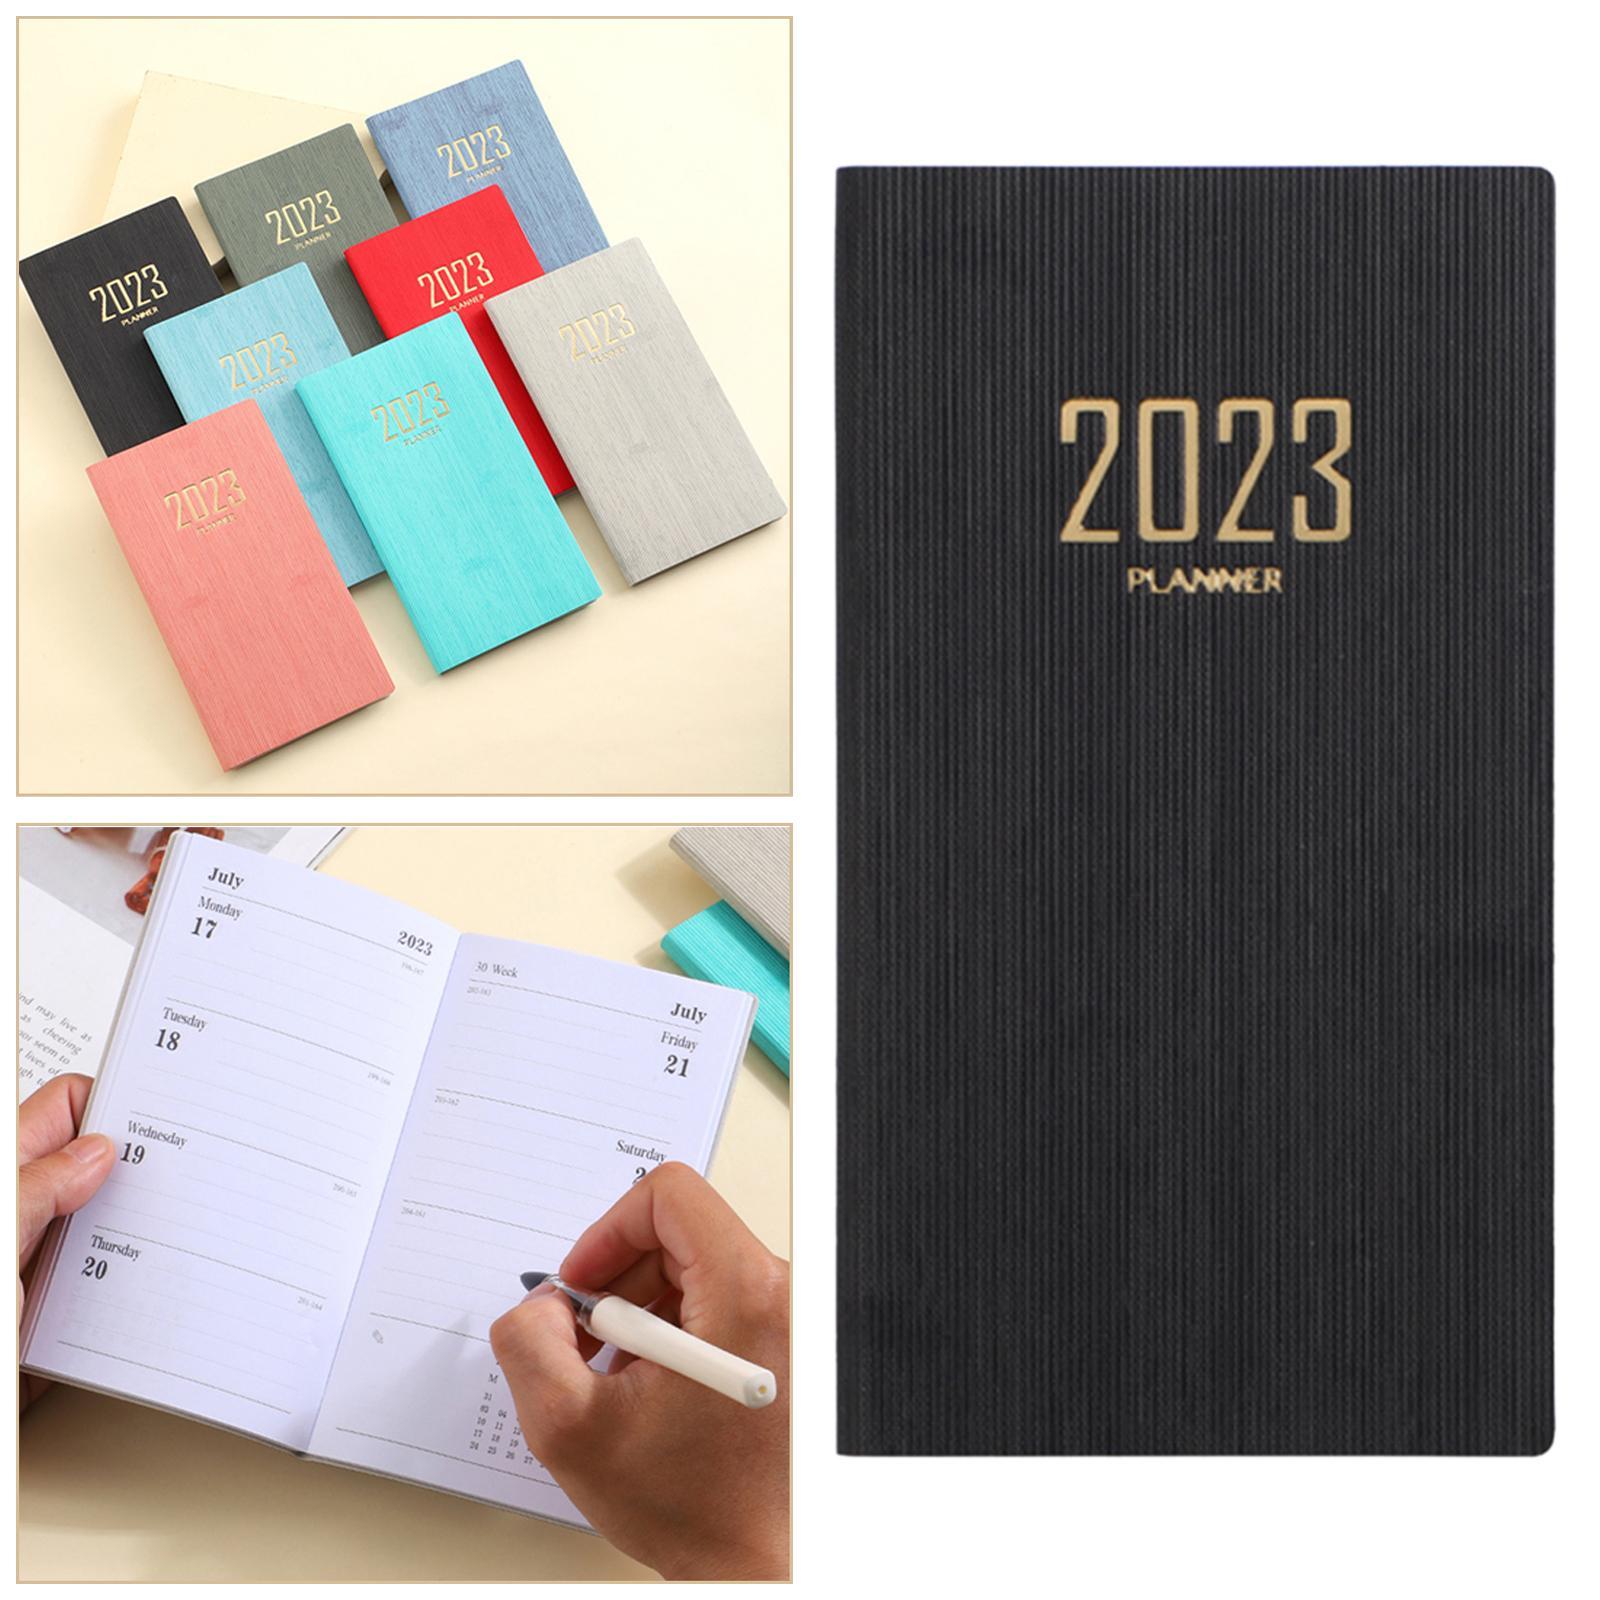 2x Recording Weekly Notebook Planner Planning Daily Account for Gifts Home